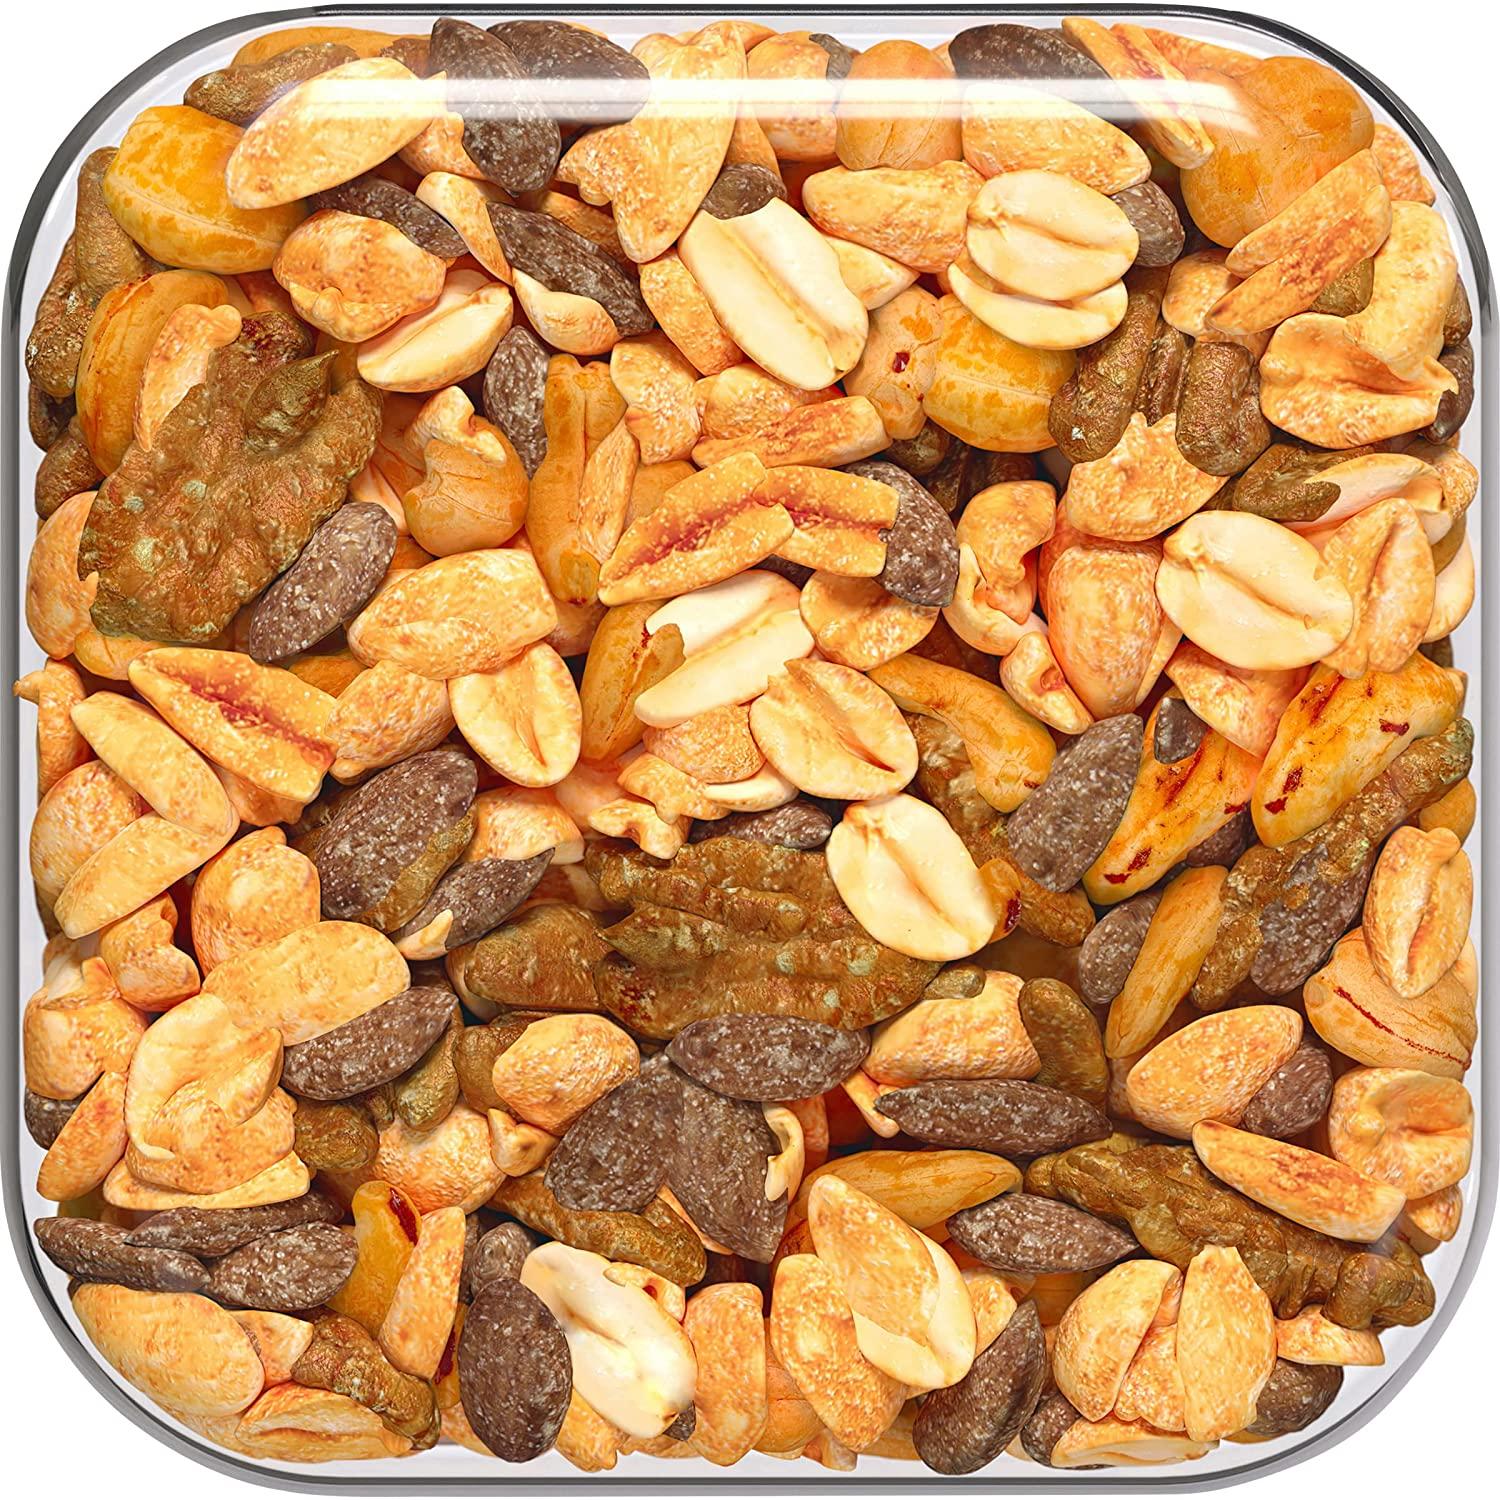 Fisher Snack Honey Roasted Mixed Nuts with Peanuts, 24 Ounces, Peanuts,  Cashews, Almonds, Filberts, Pecans Honey Roasted Nuts 1.5 Pound (Pack of 1)